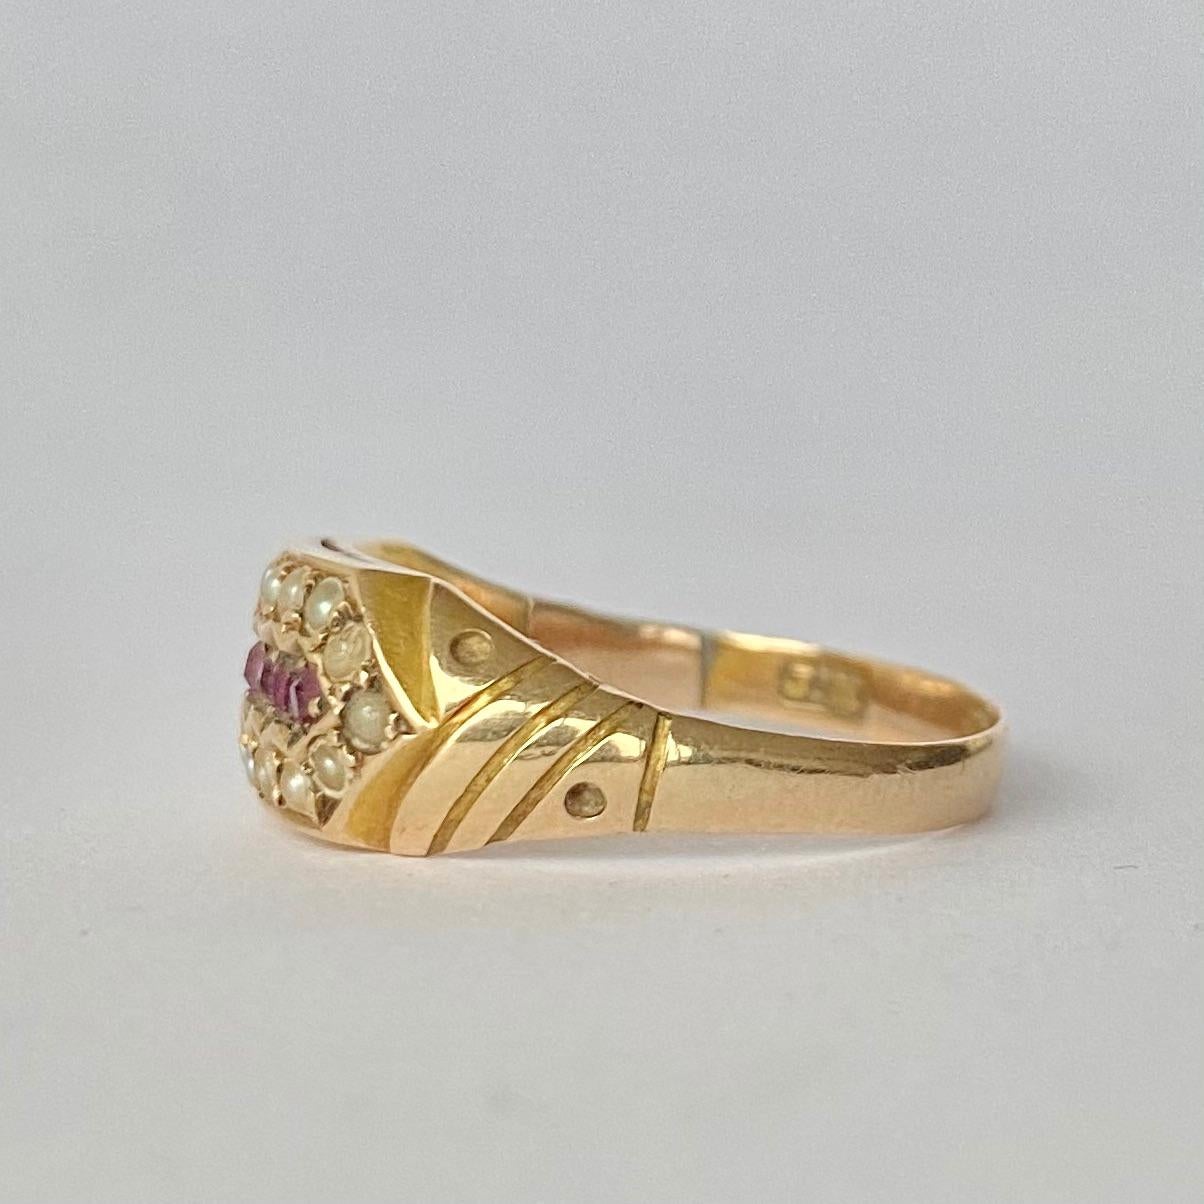 Surrounding the row of bright red rubies are shimmering pearls. Modelled in 15carat gold and made in Birmingham, England.

Ring Size: N 1/2 or 7 
Band Width: 7.5mm 

Weight: 2.2g